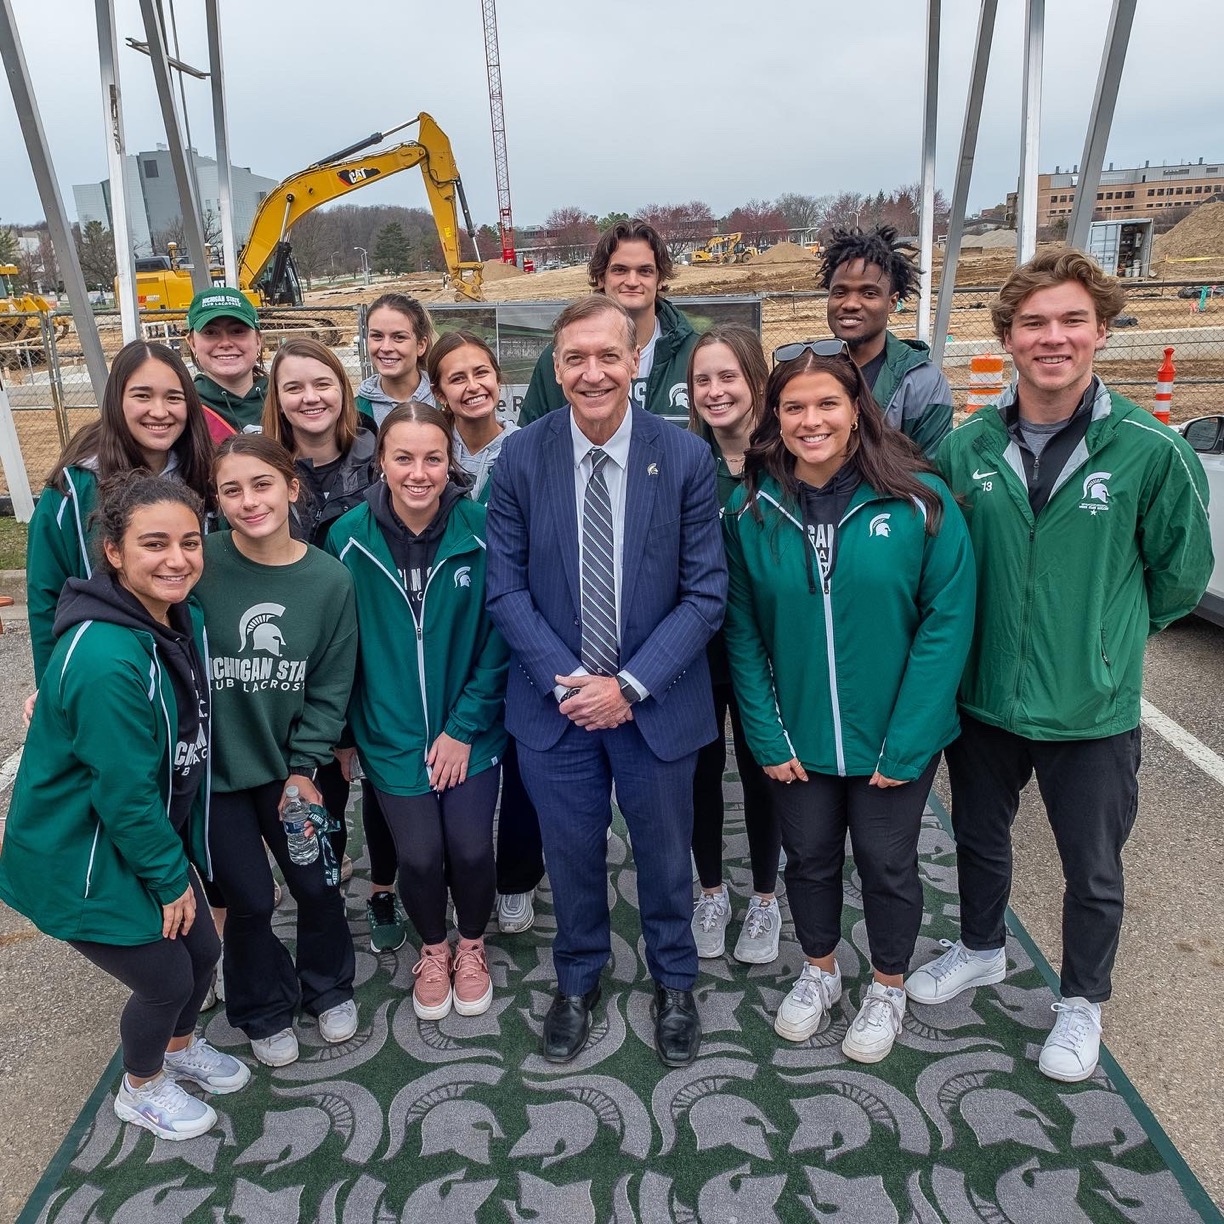 President Stanley with club sports and intramural sports students in front of construction site for the Service Road turf fields